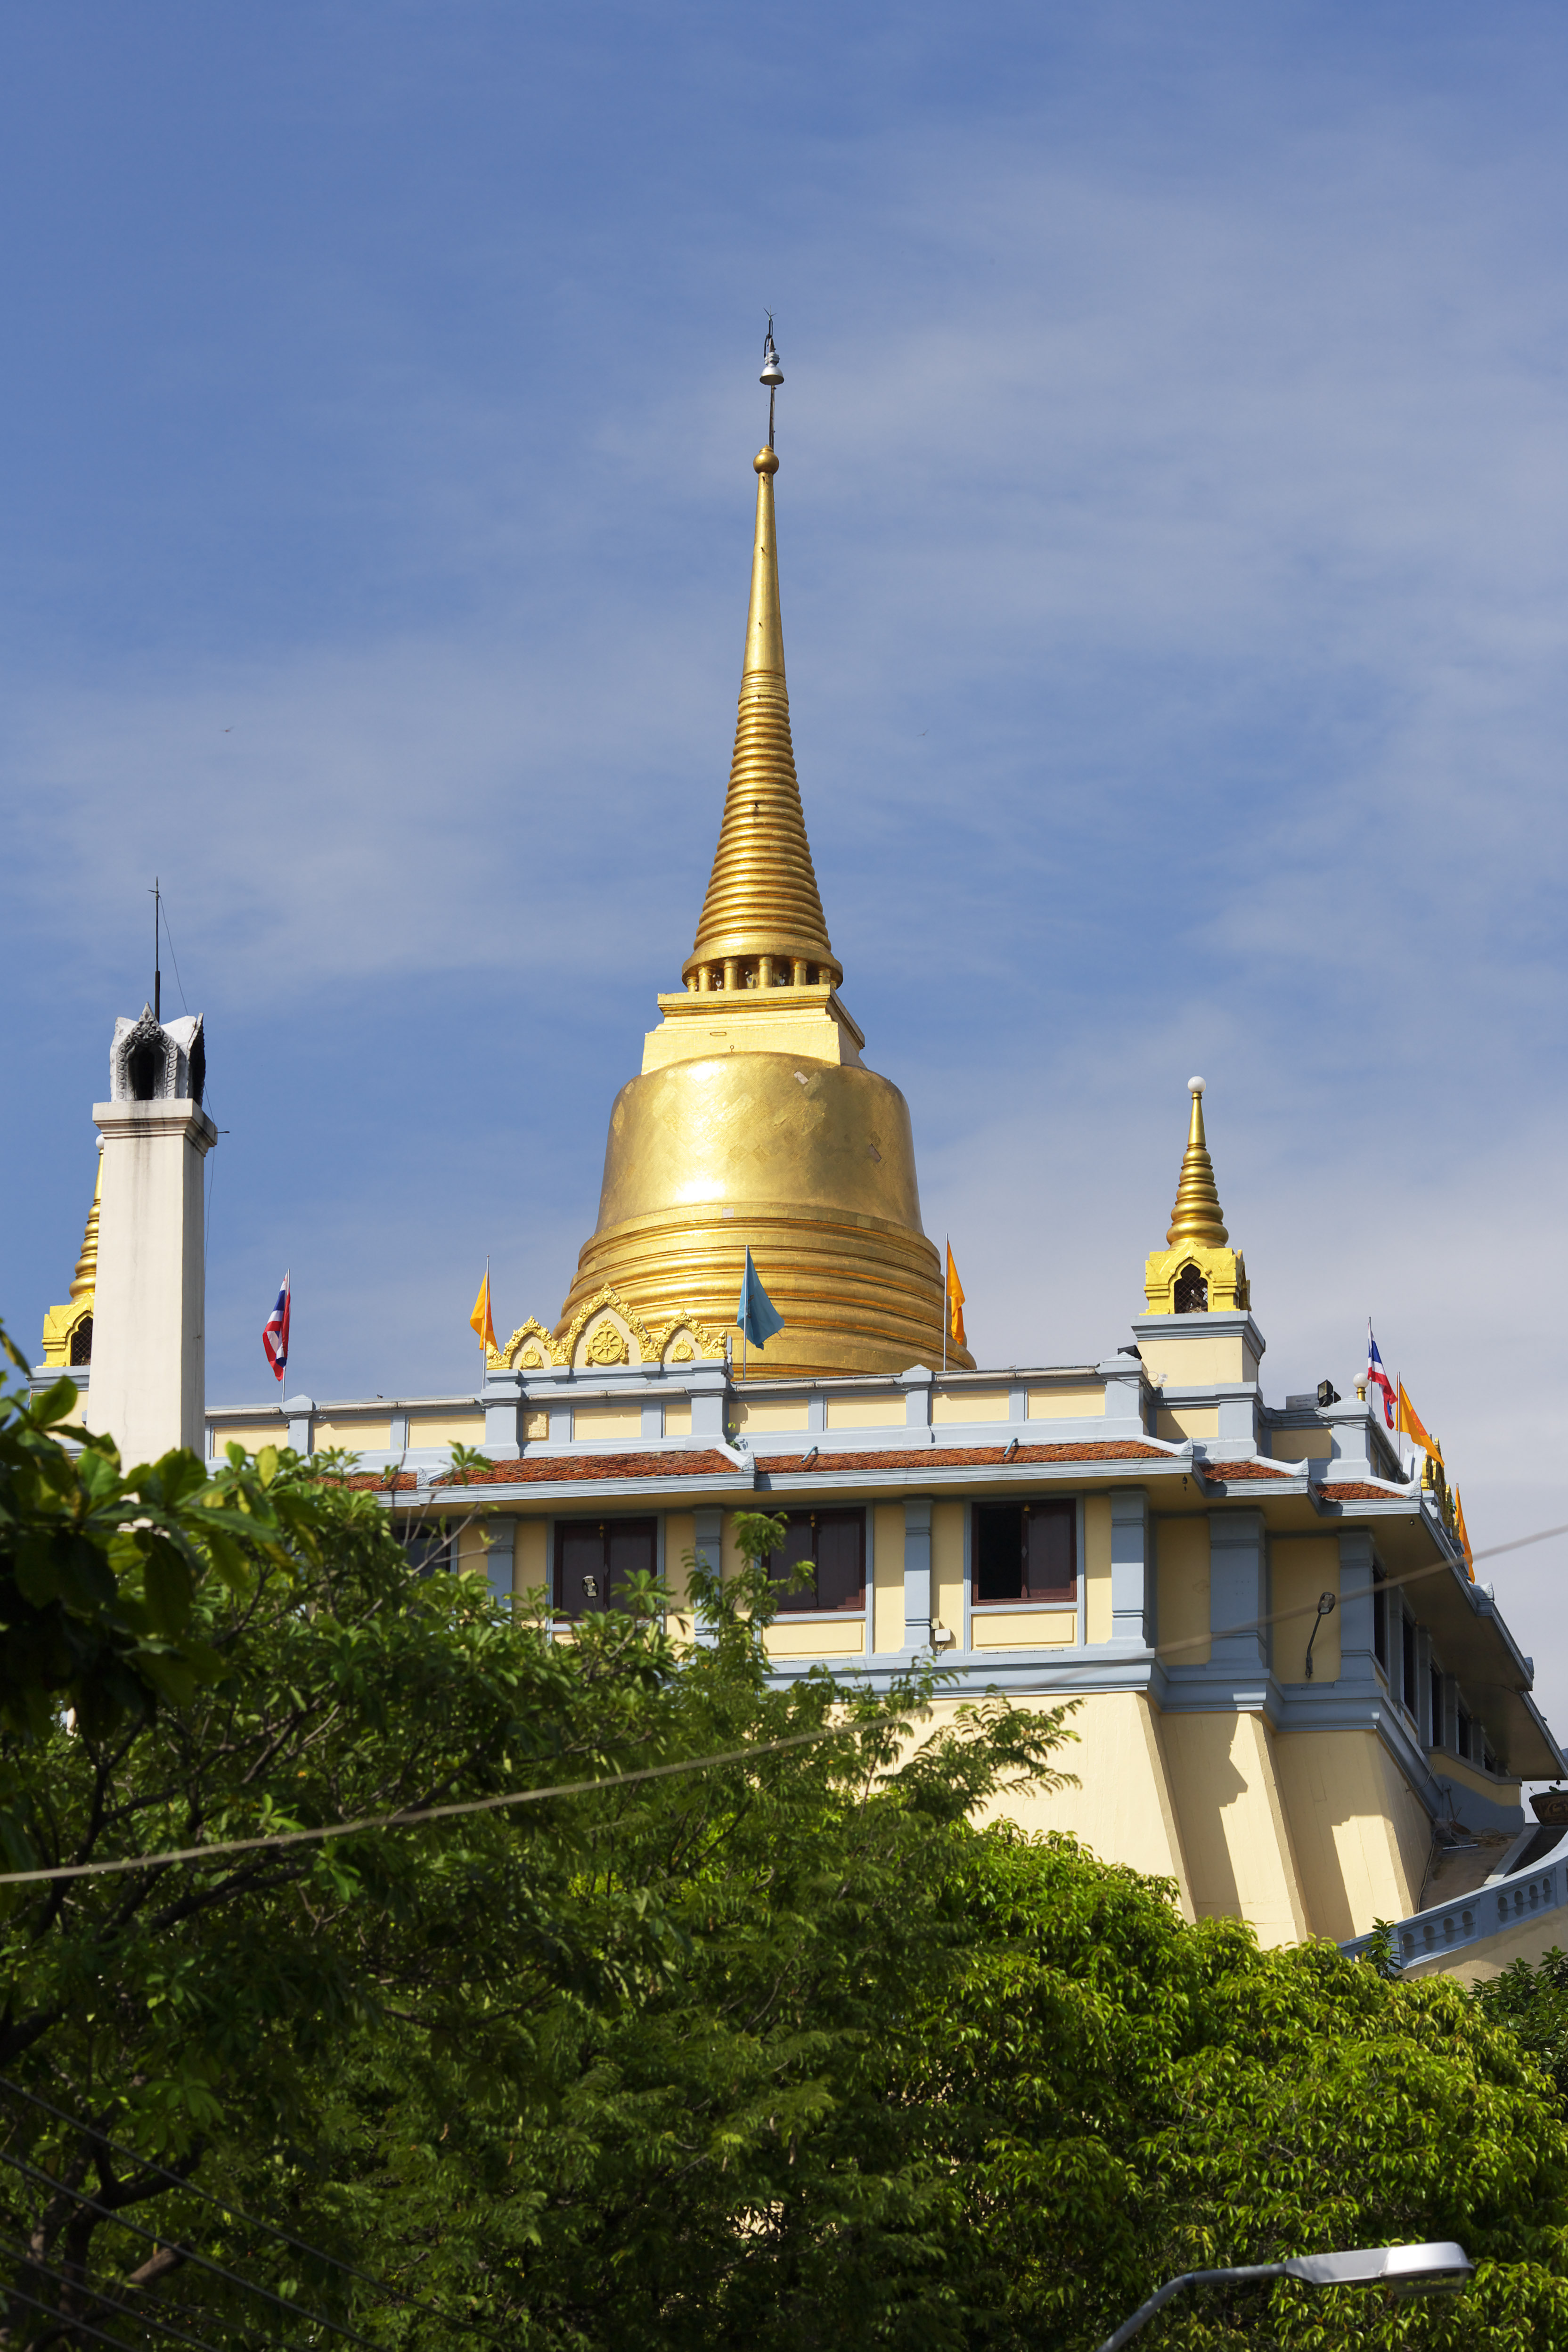 photo,material,free,landscape,picture,stock photo,Creative Commons,Wat Sakhet, temple, pagoda, hill, Gold